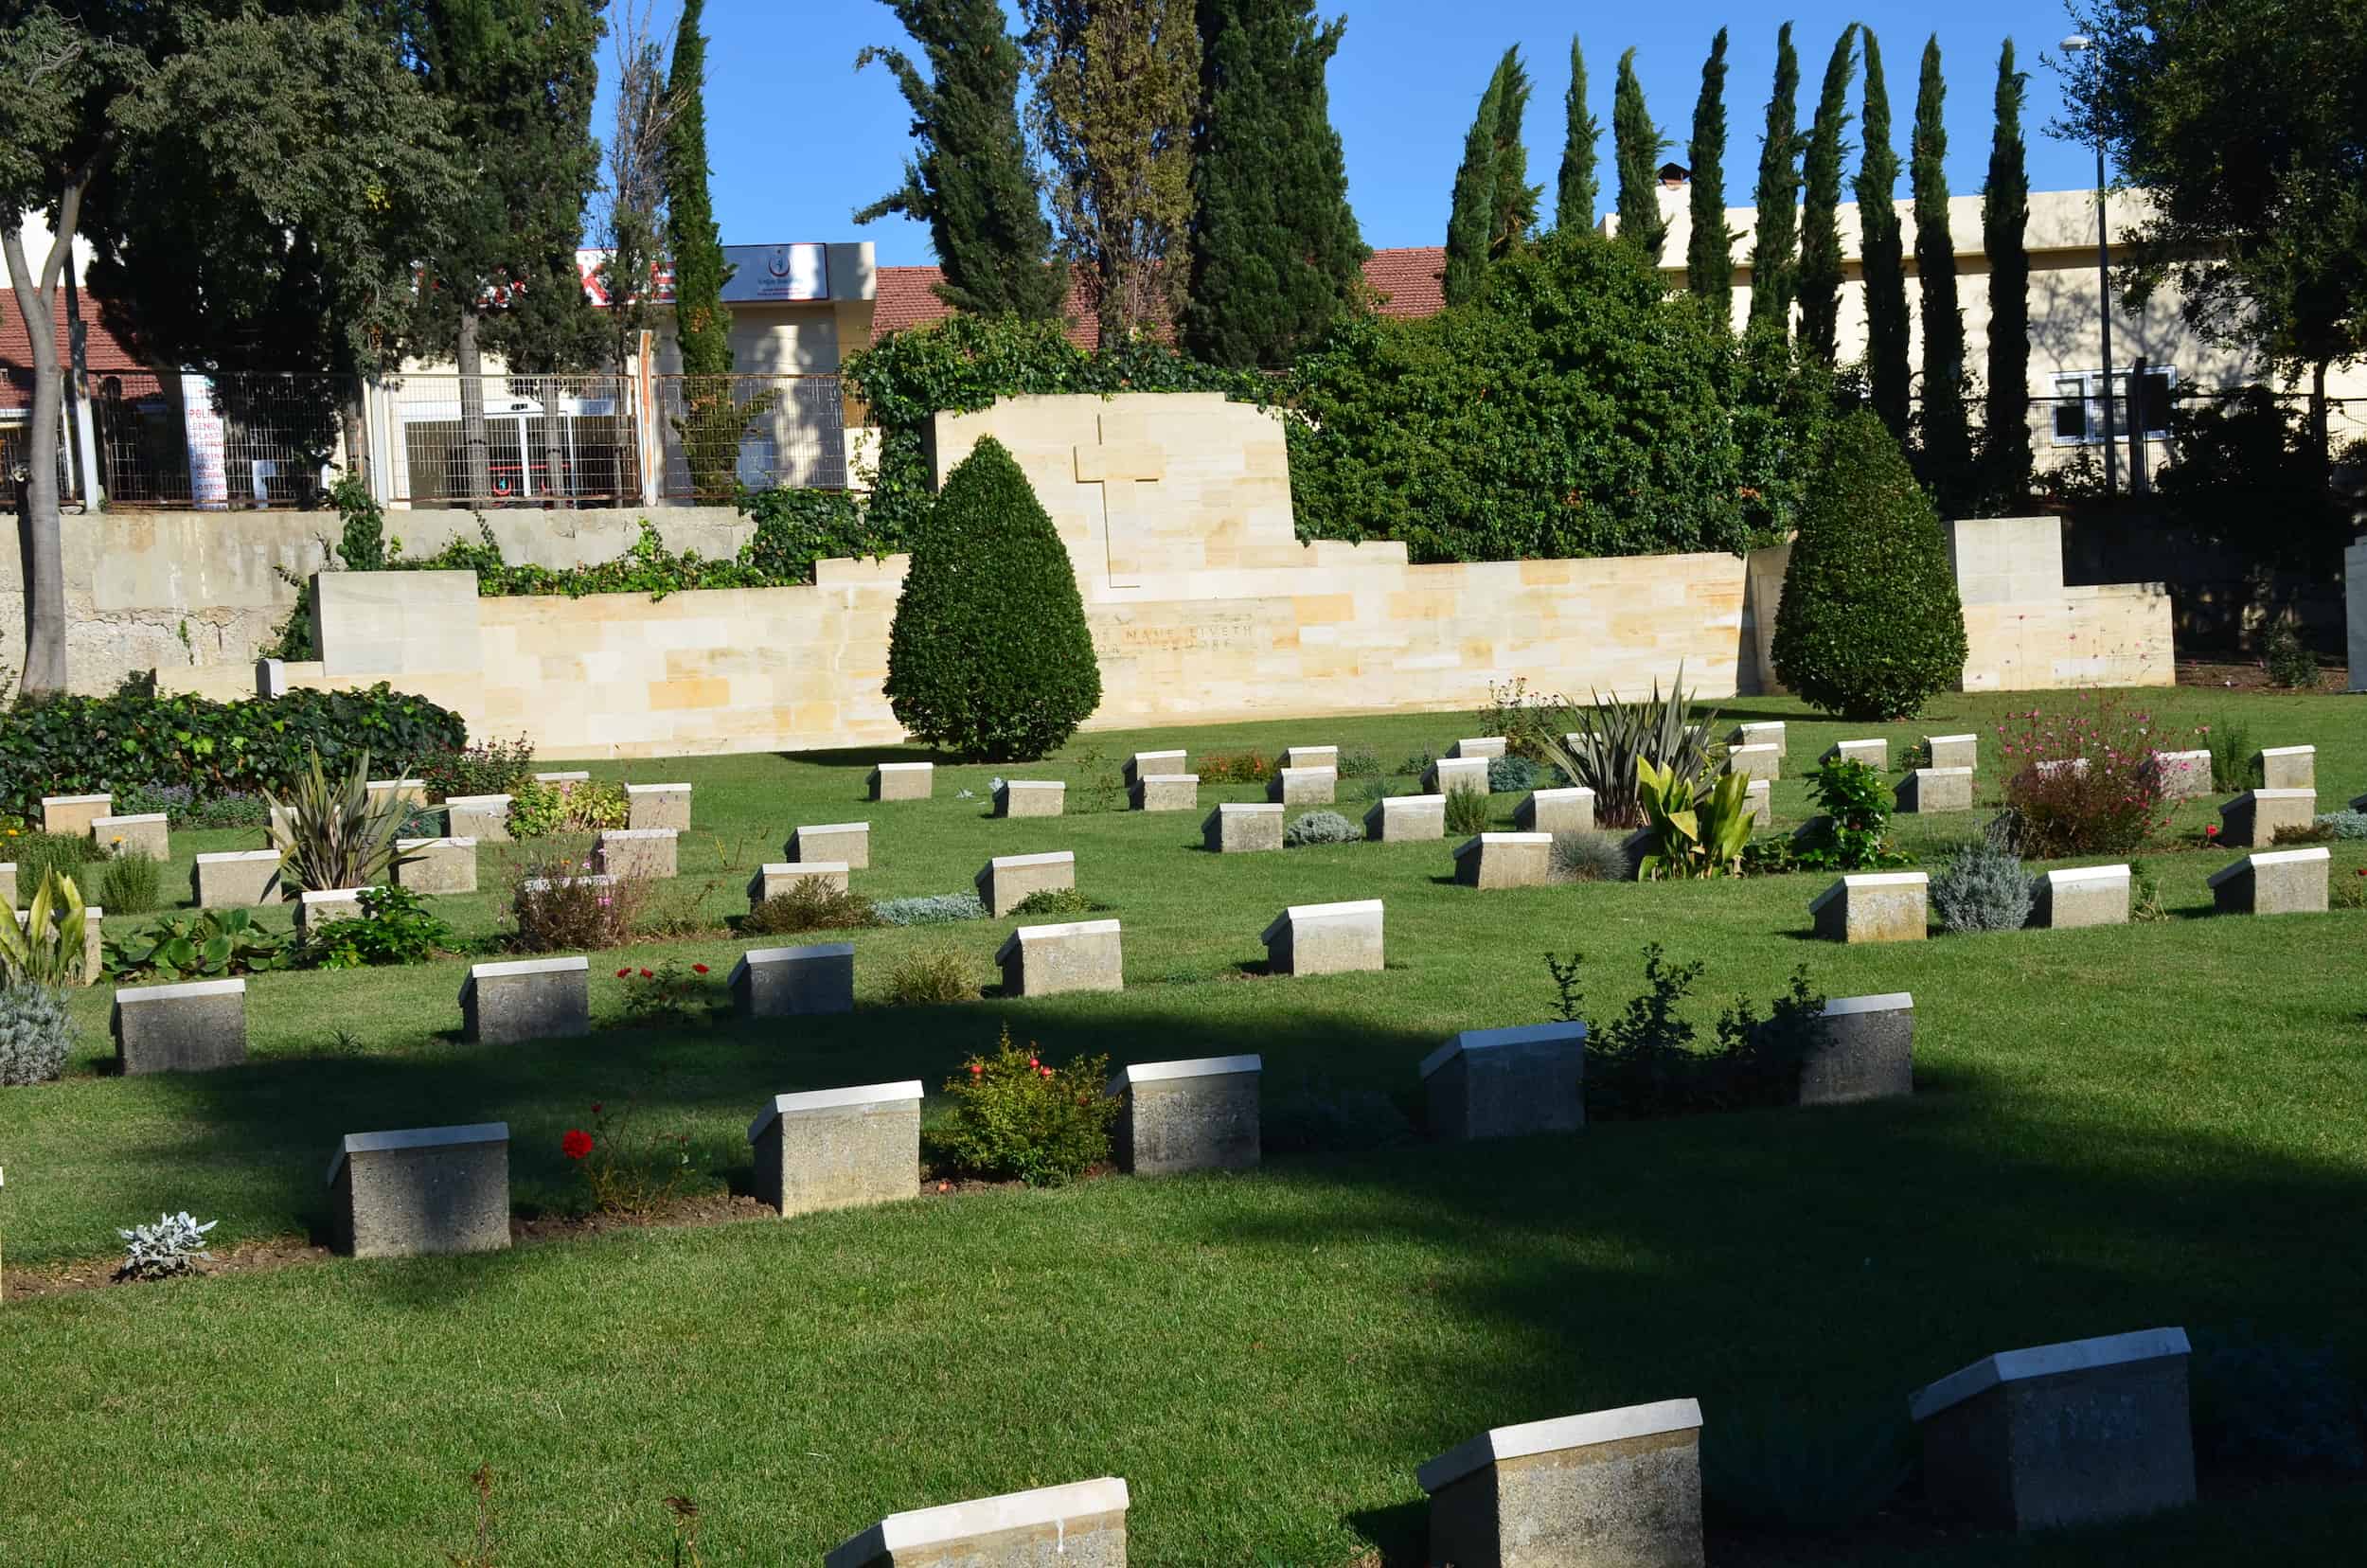 World War I section at the Haidar Pasha Cemetery in Istanbul, Turkey